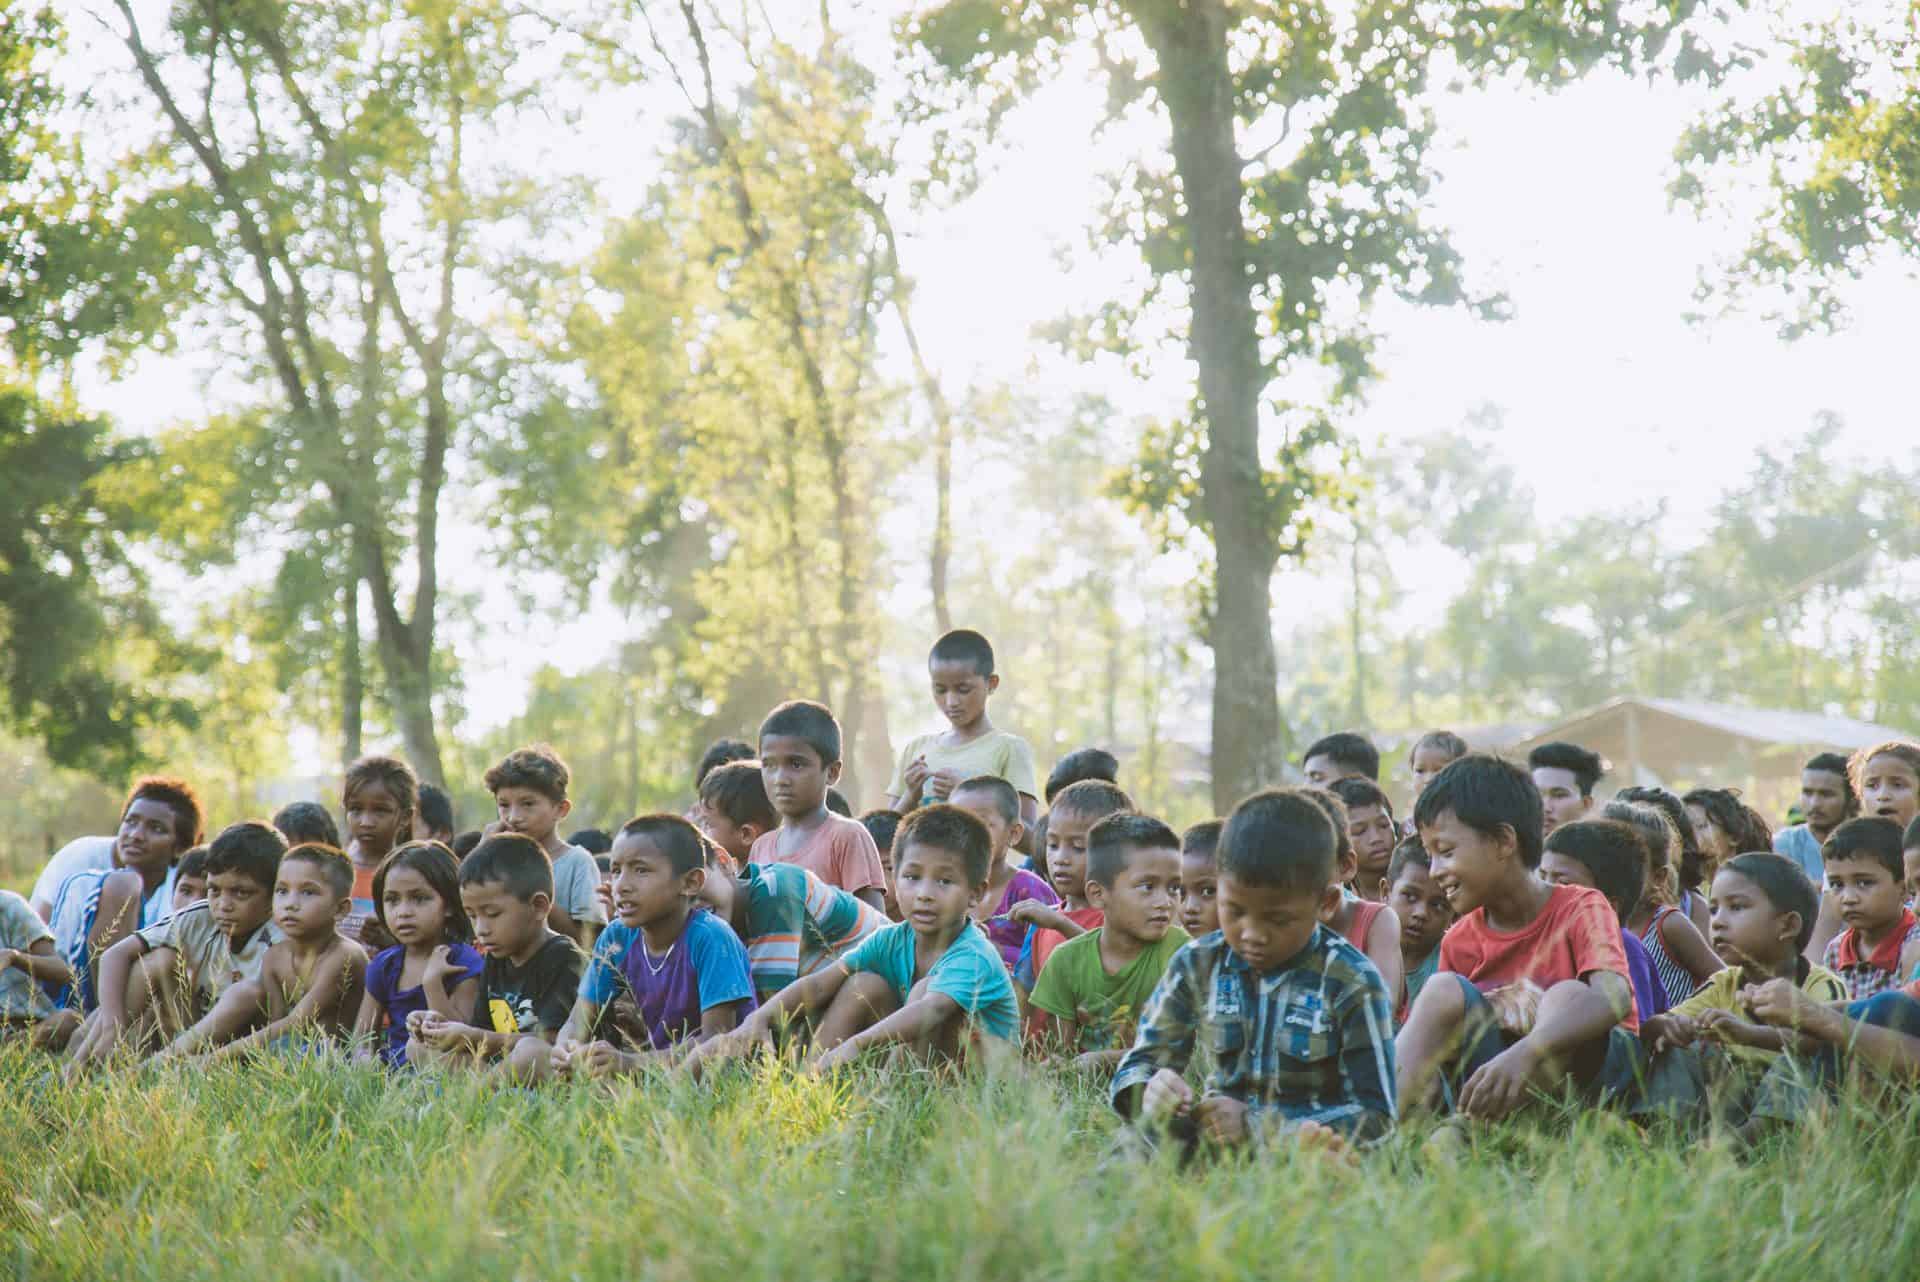 Children sit in a field at the Himalayan Life Sport Training & Daycamps in Pokhara, Nepal